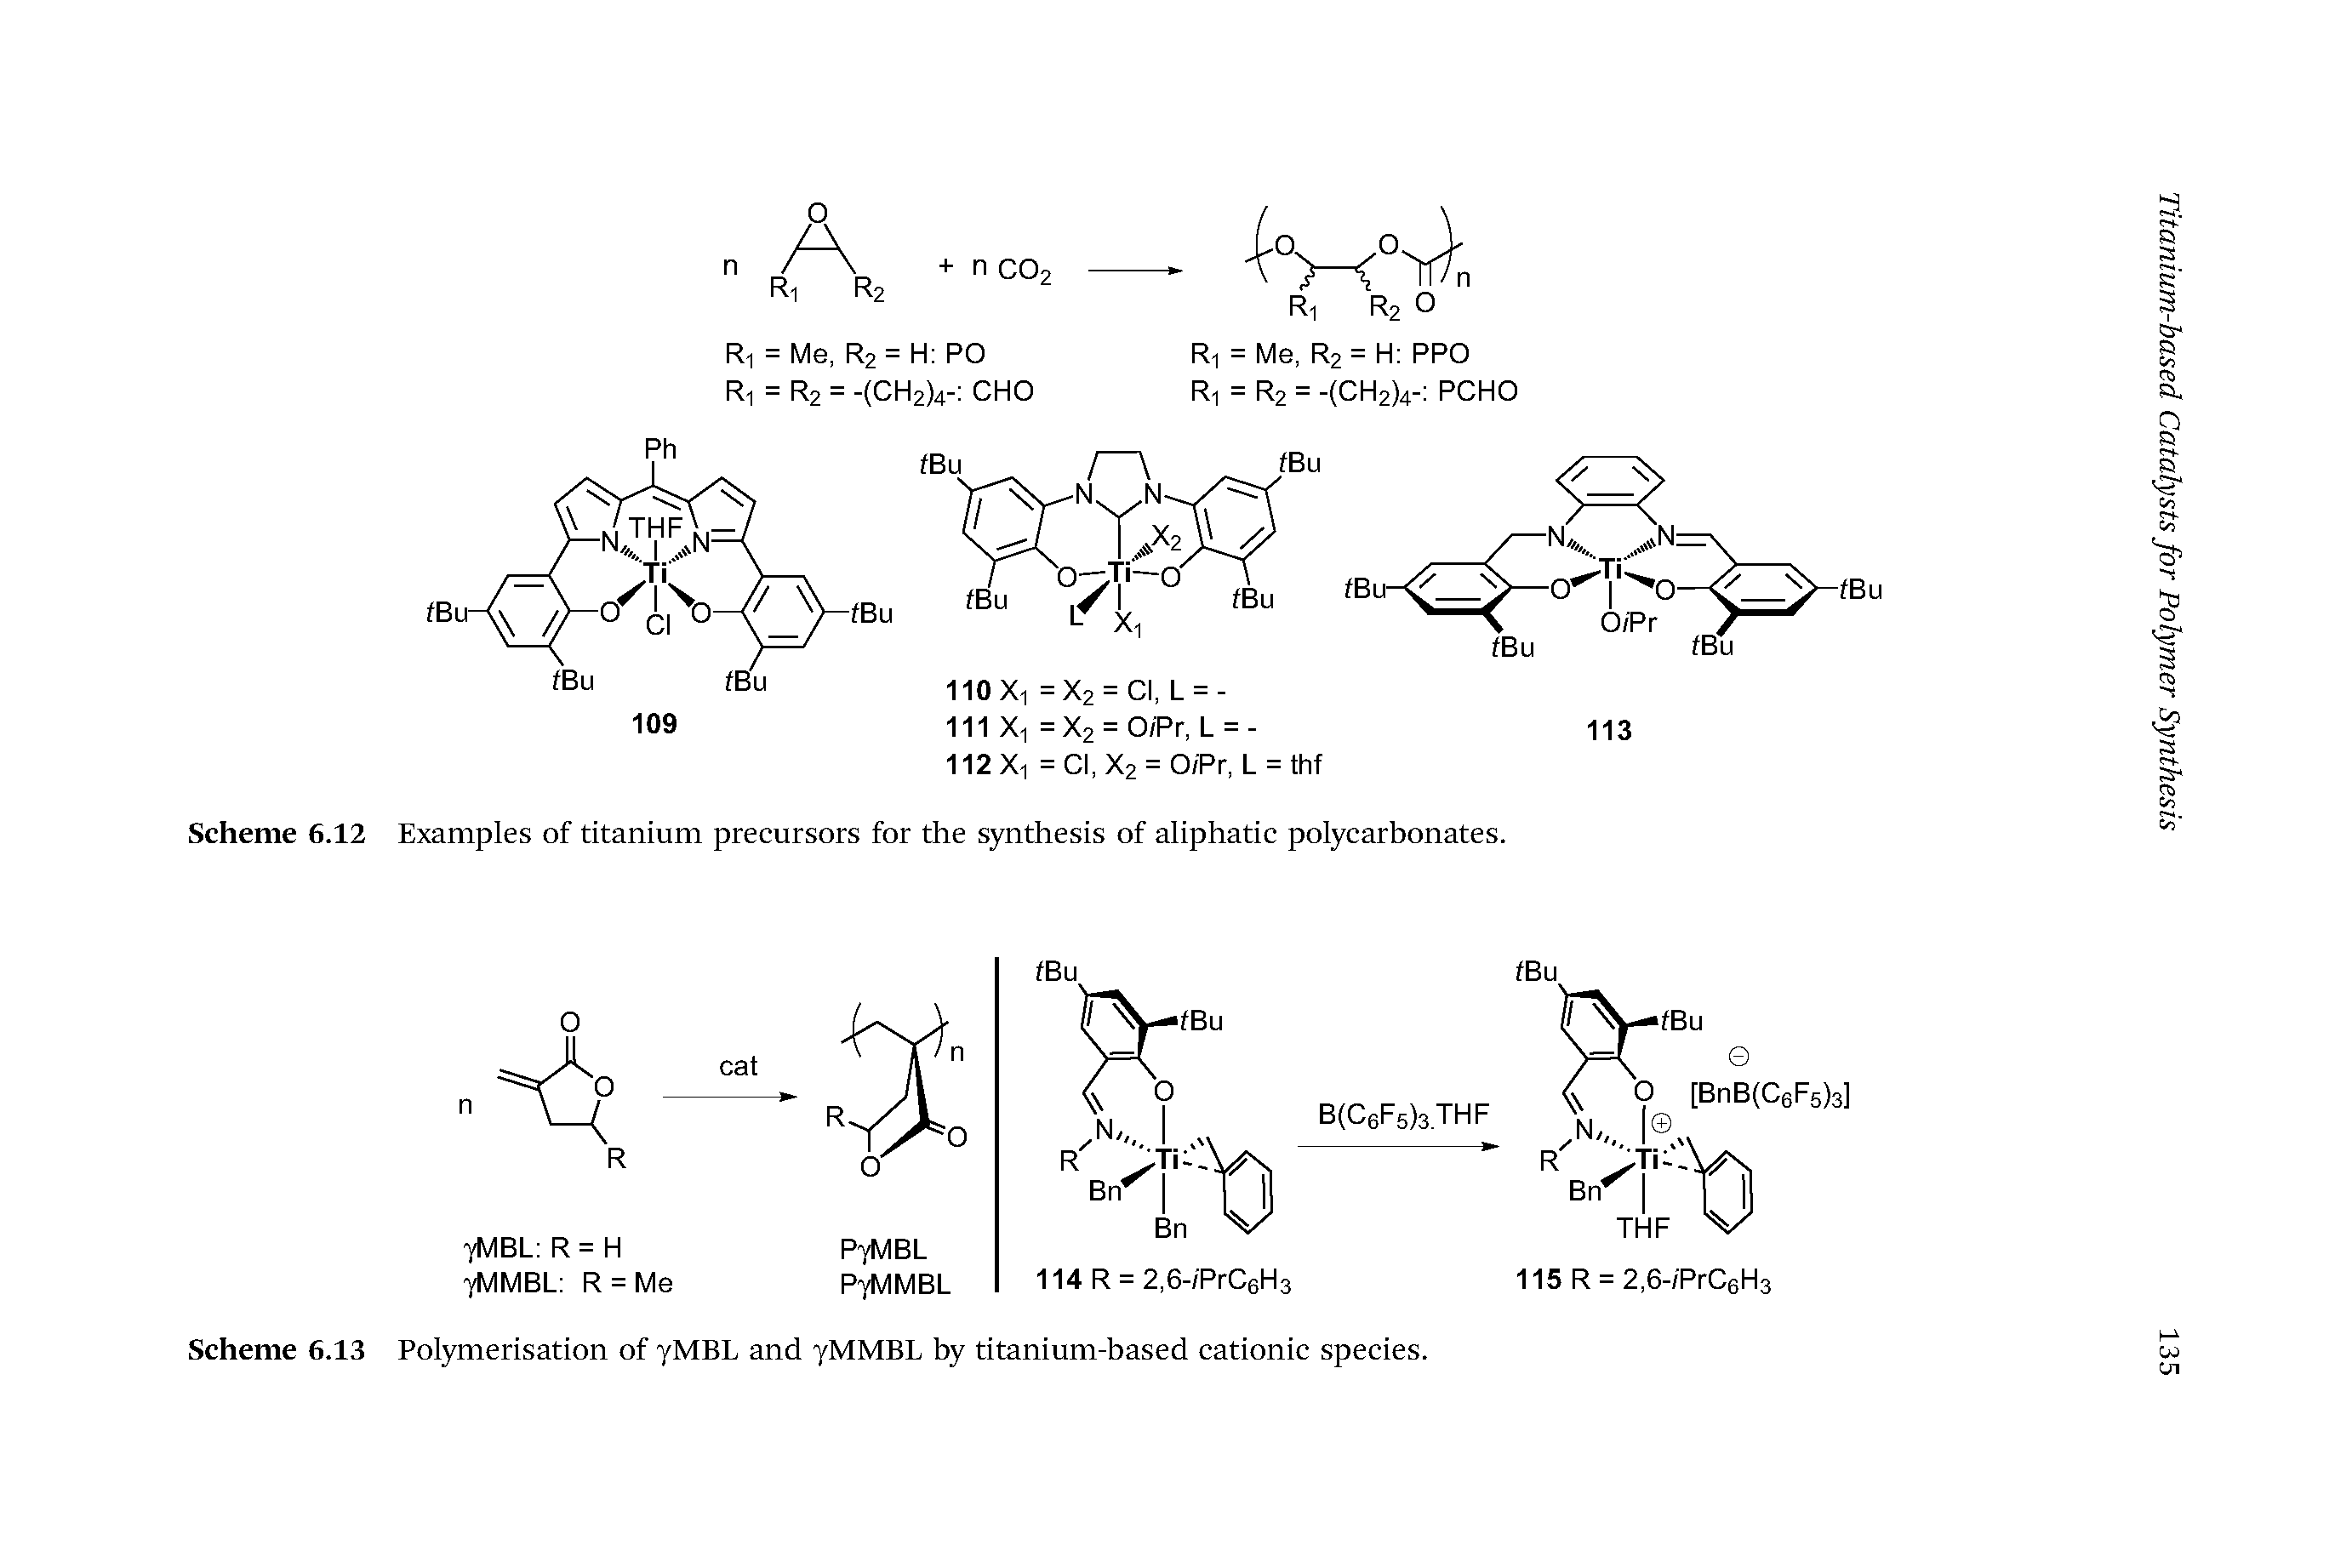 Scheme 6.13 Polymerisation of yMBL and yMMBL by titanium-based cationic species.